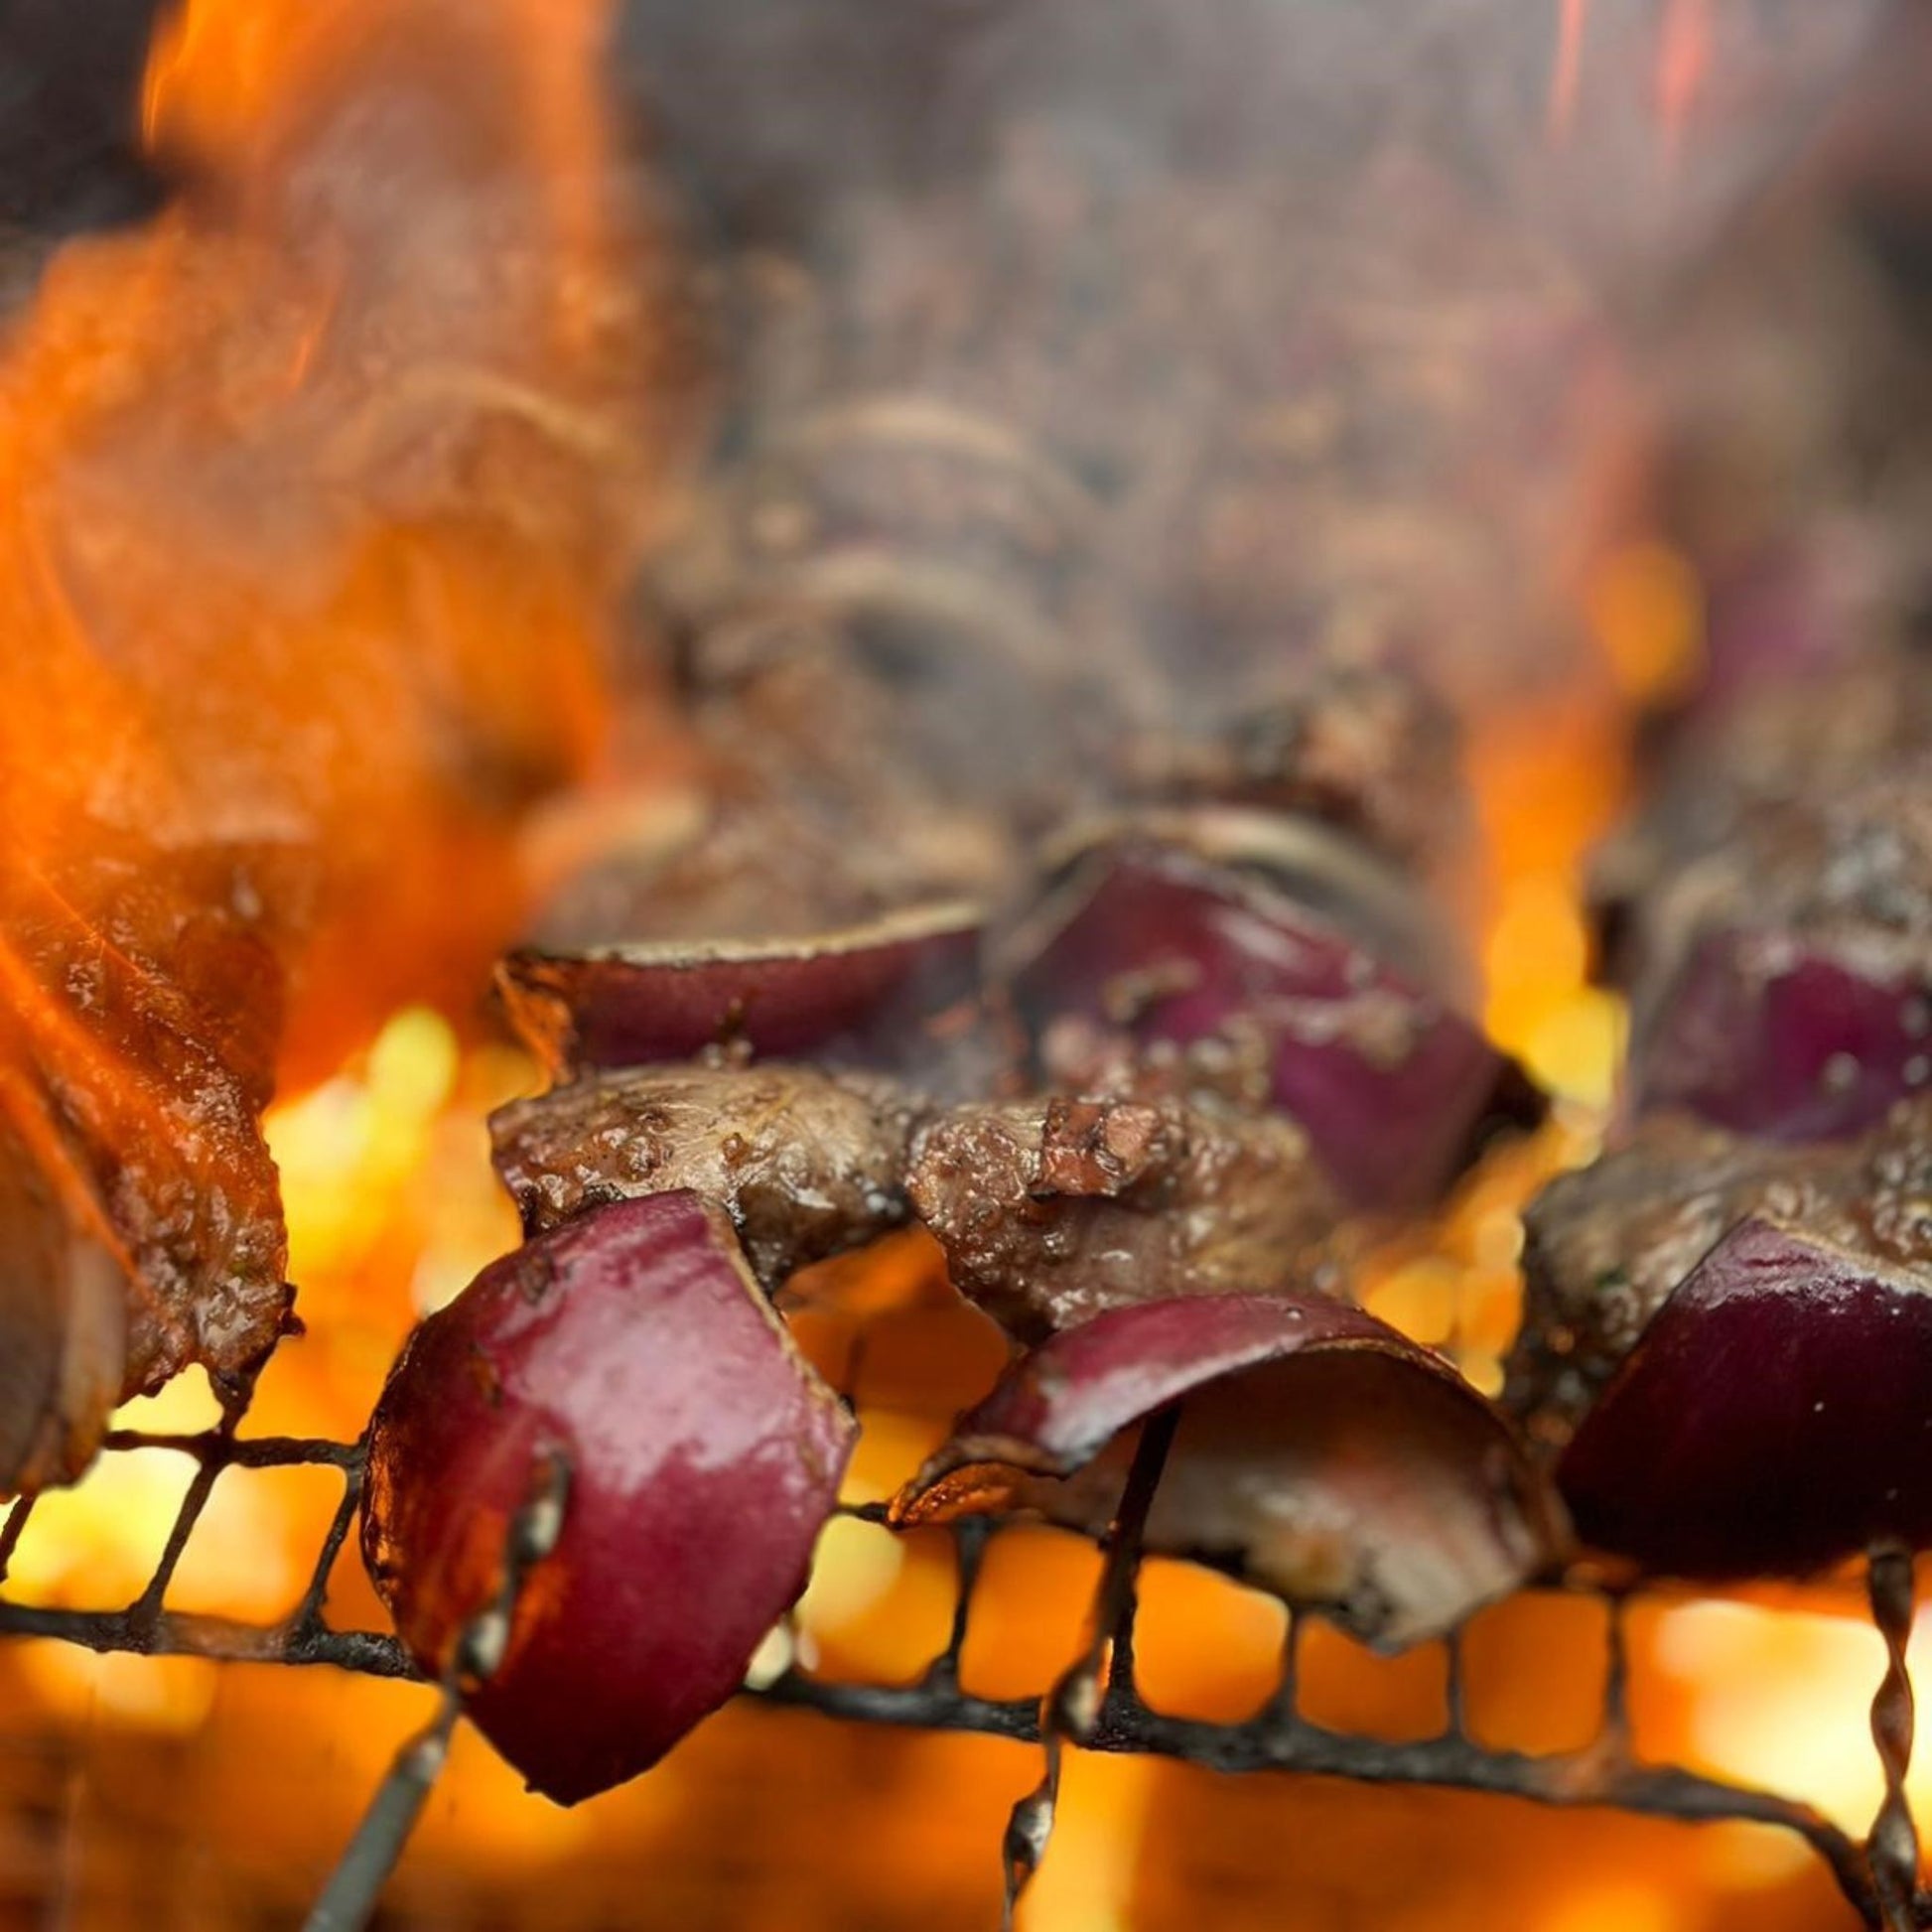 Onions and meat cooking over the live flames